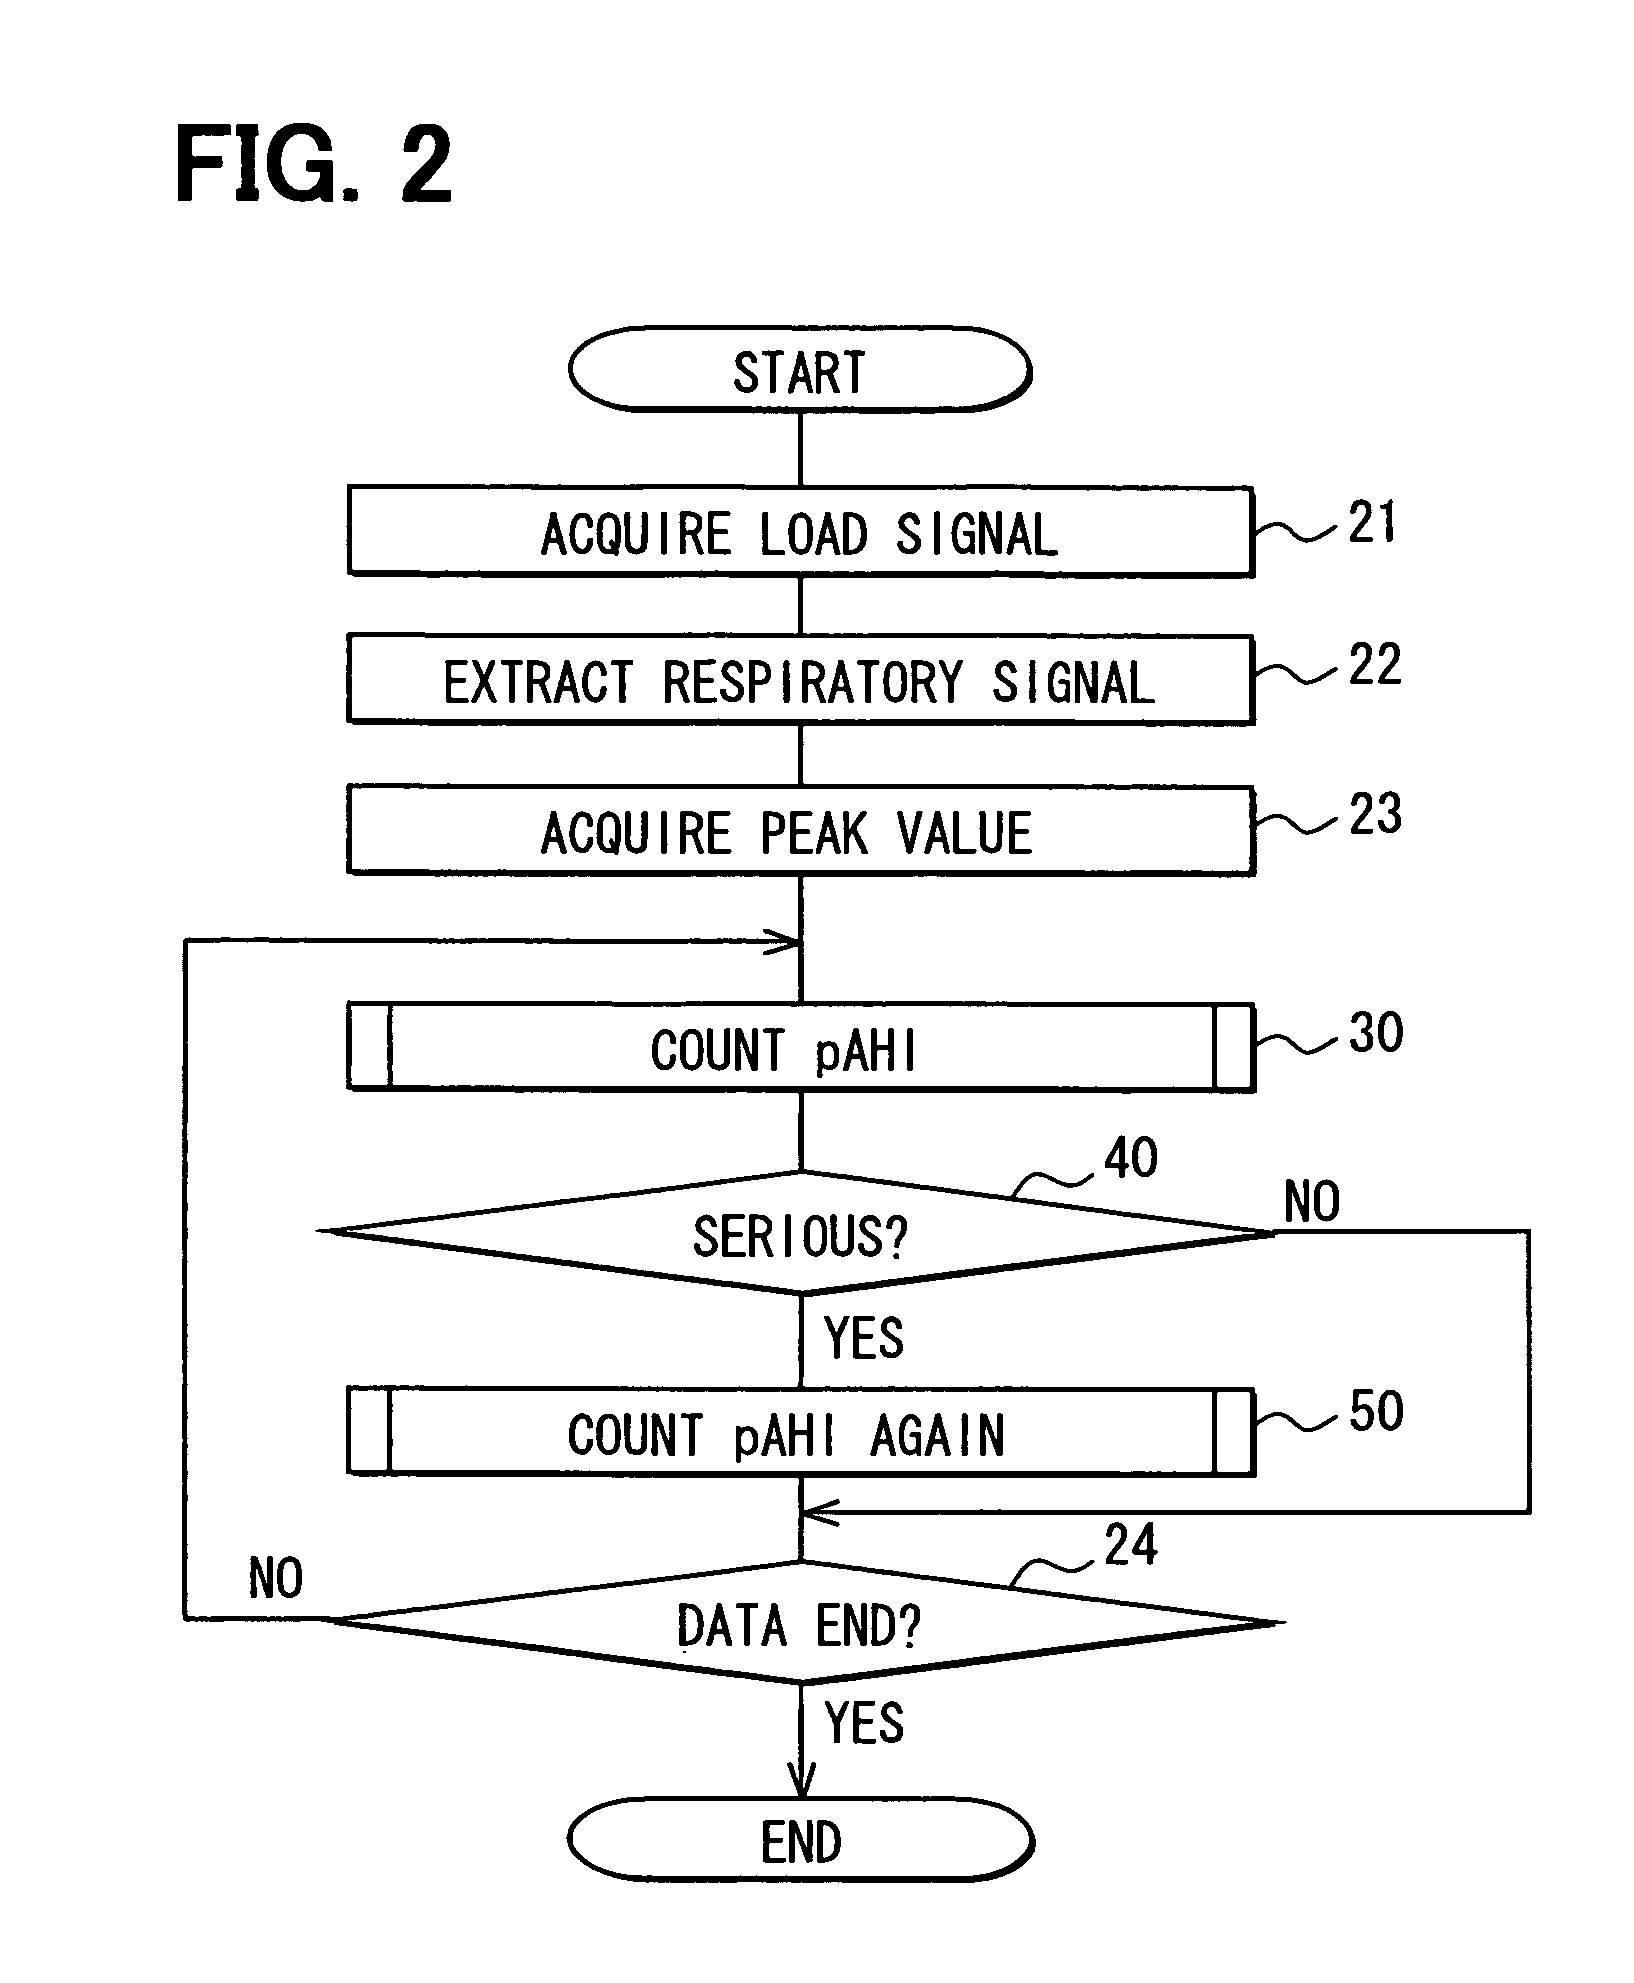 Method and apparatus of analyzing respiratory signals corresponding to changes in subject's loads applied to bed